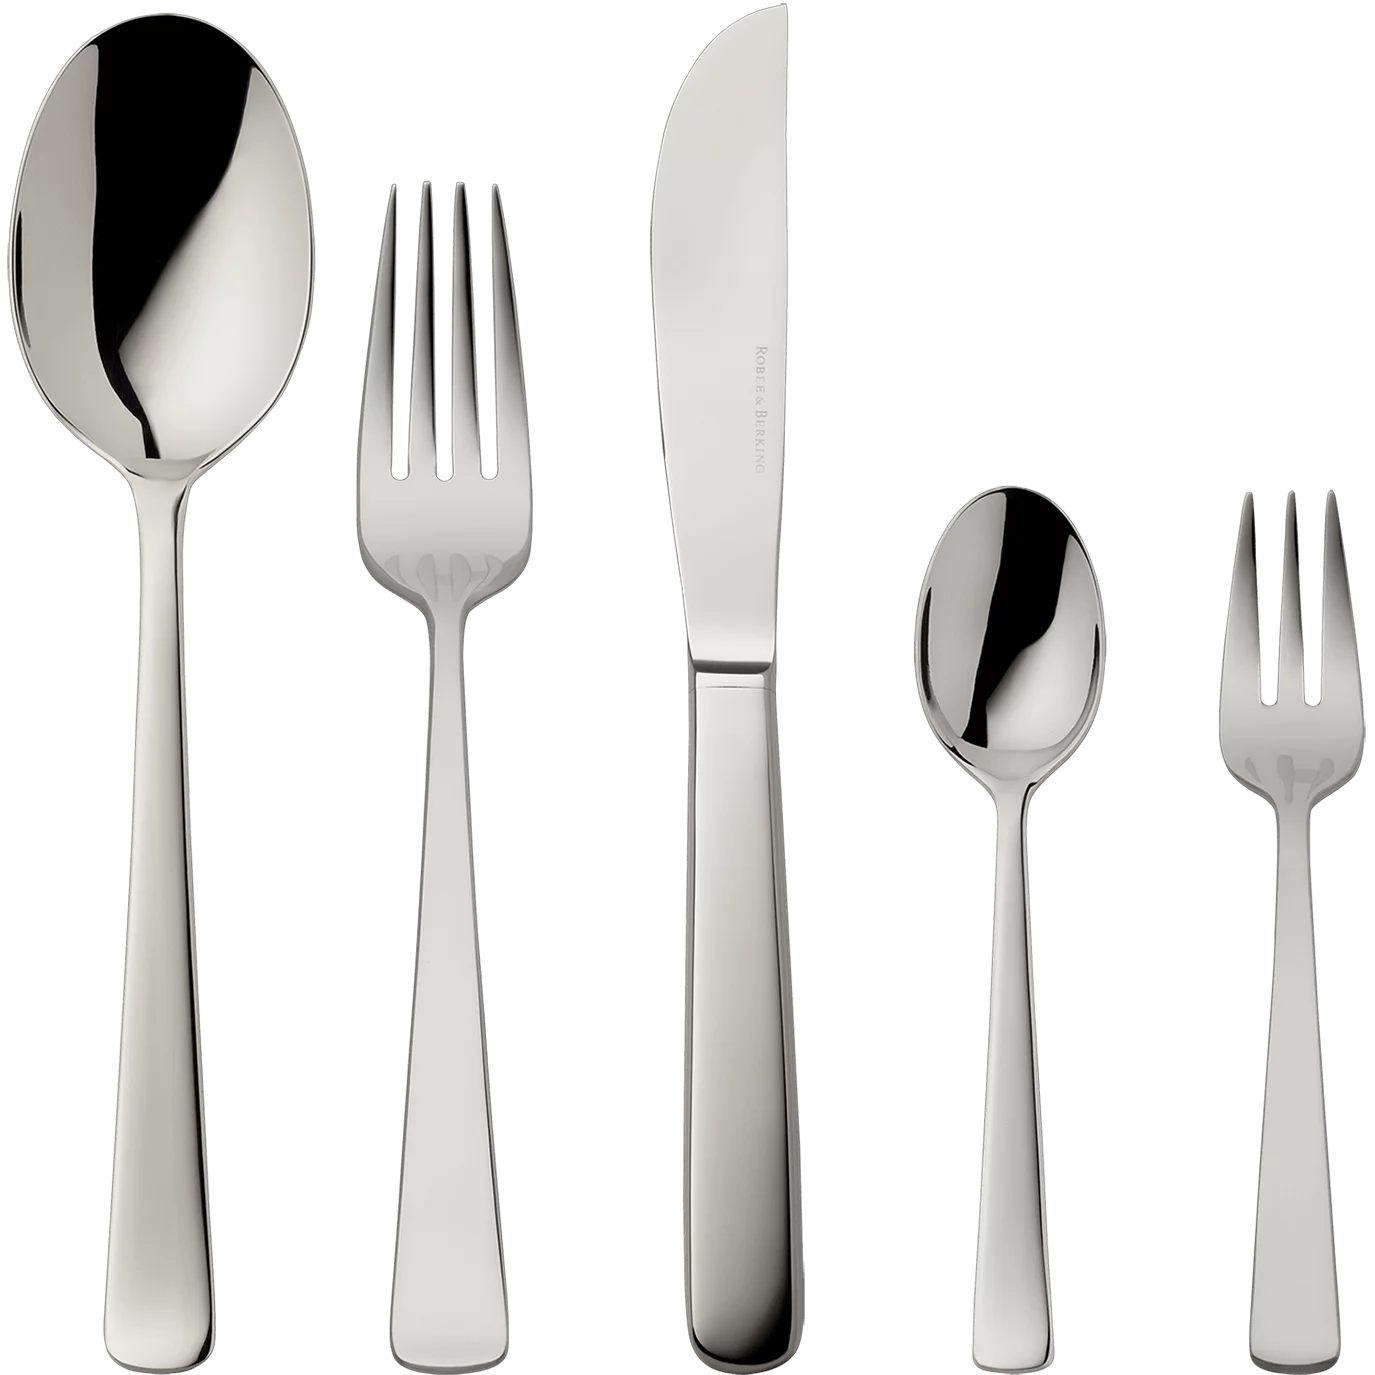 Atlantic Brillant 5-piece place setting (18/8 stainless steel)